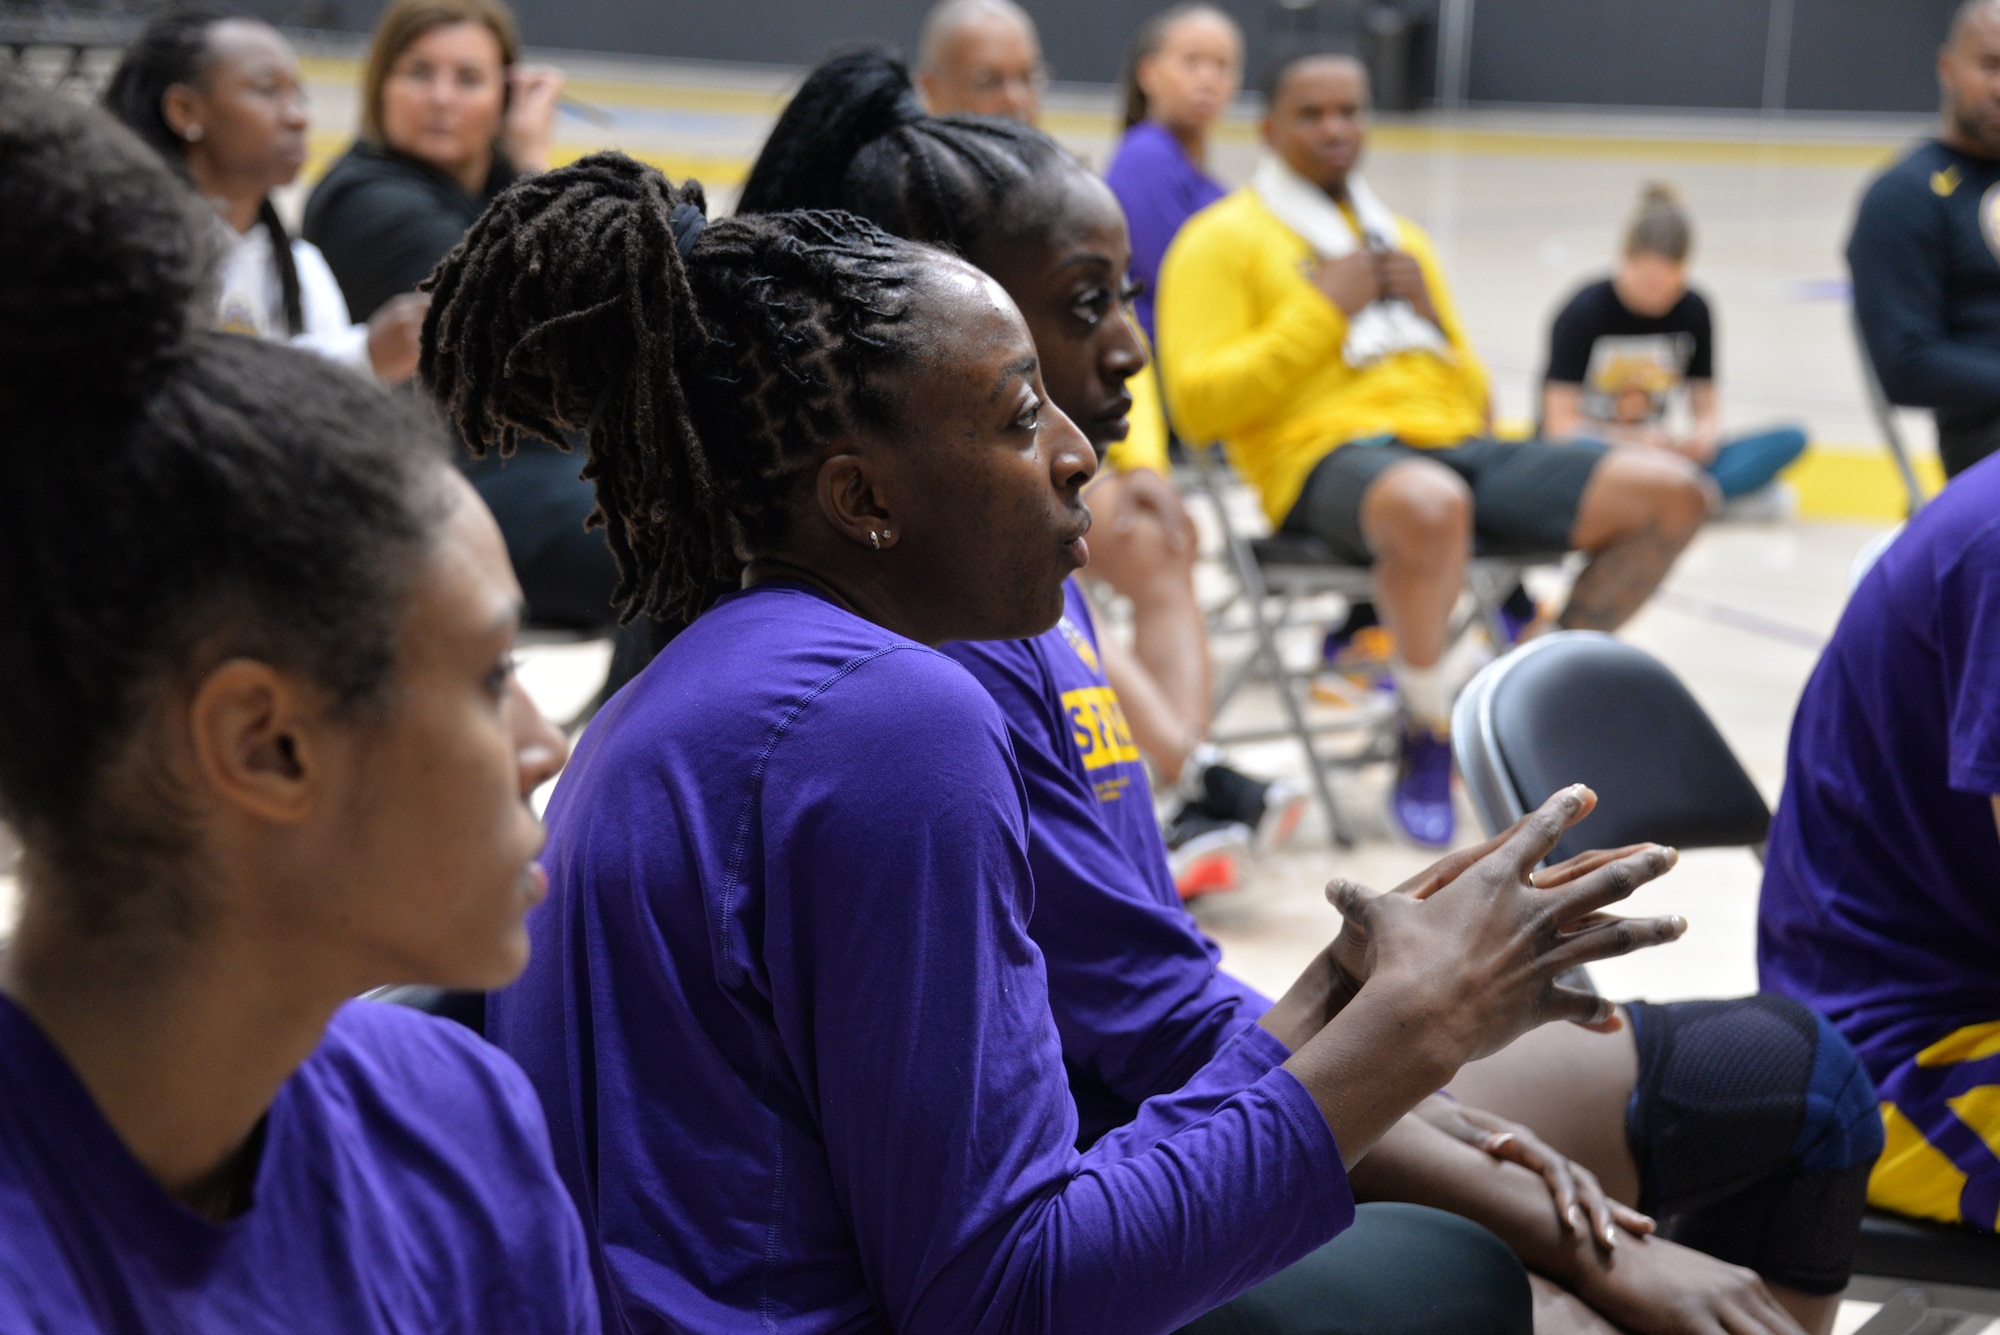 L.A. Sparks forward Nneka Ogwumike, center, asks Col. Krolikowski a question about her experience working in a fast-paced, high-pressure environment. Her sister, Chiney Ogwumike, right, looks on.